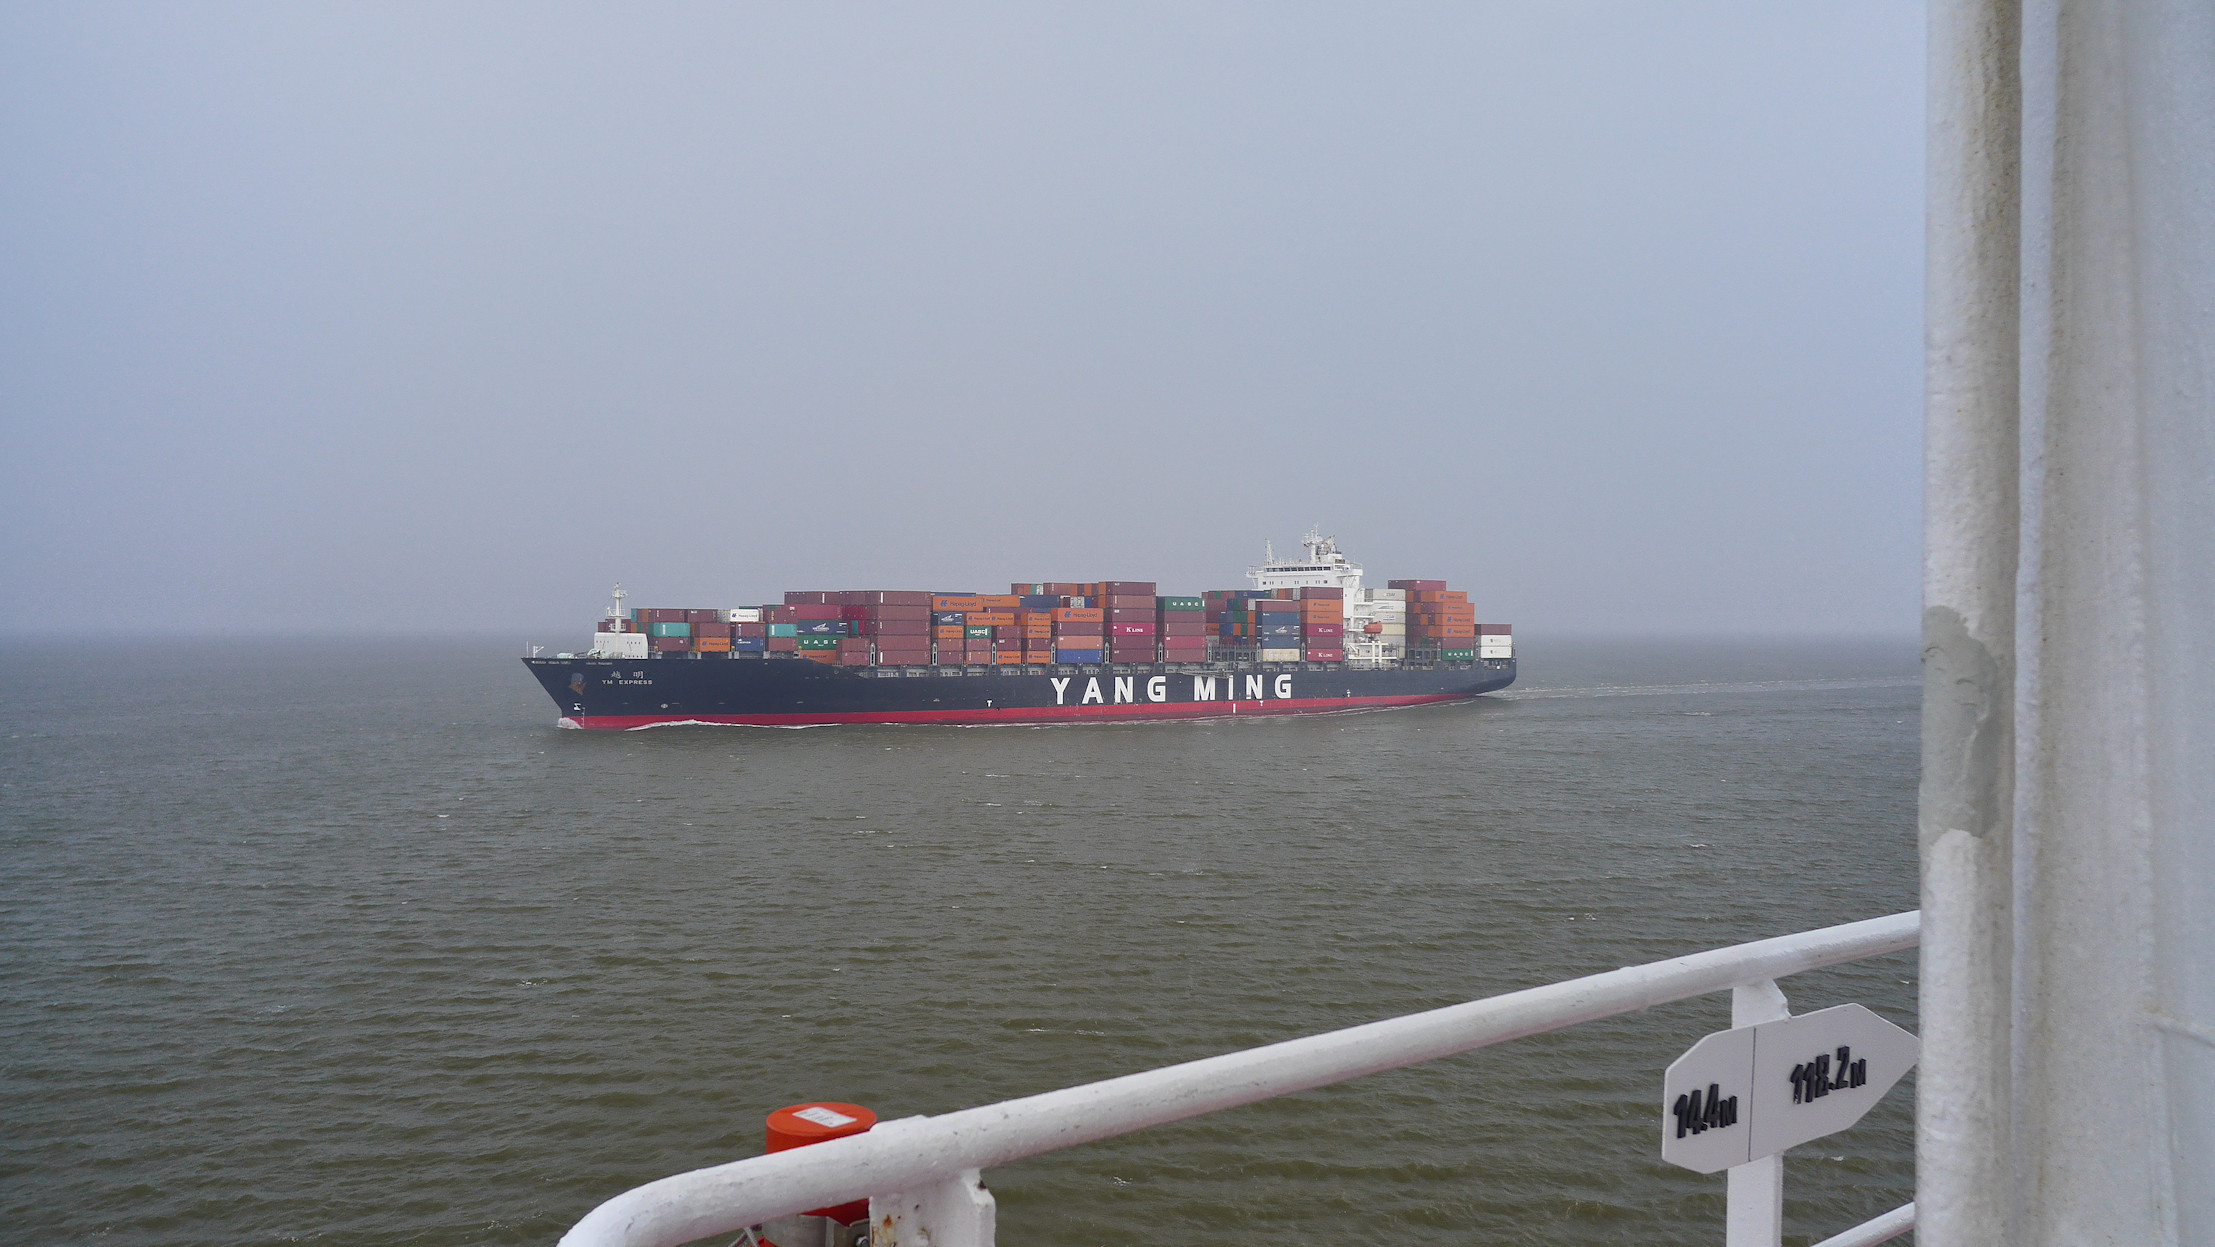 Die "YM Express", Taiwan (259m Länge, 4,662 TEU full-container vessel)